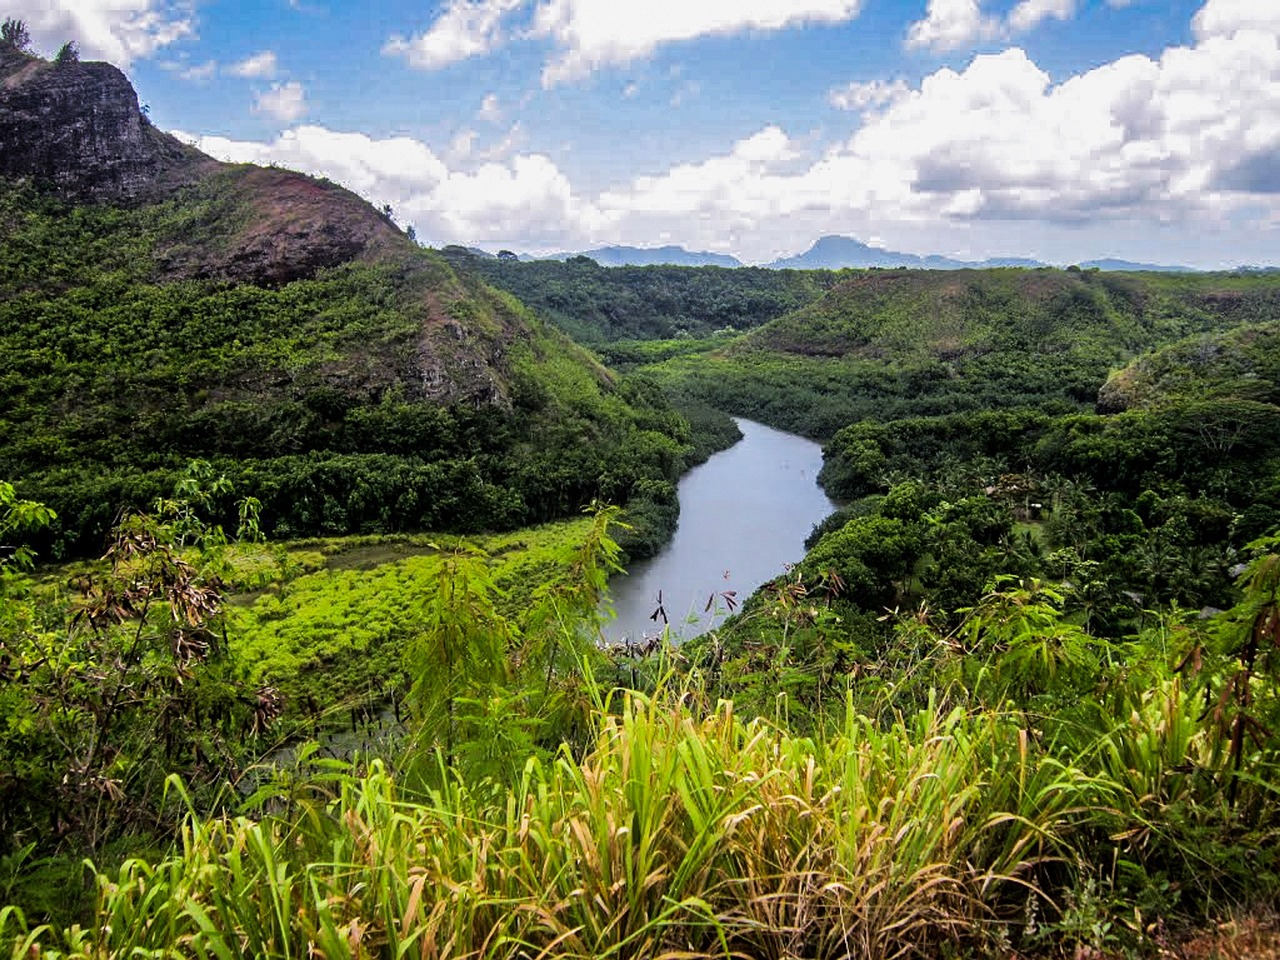 A view of the Wailua River with greenery around it in Kauai. Walking by the side of the river is one of the things to do in Kauai.